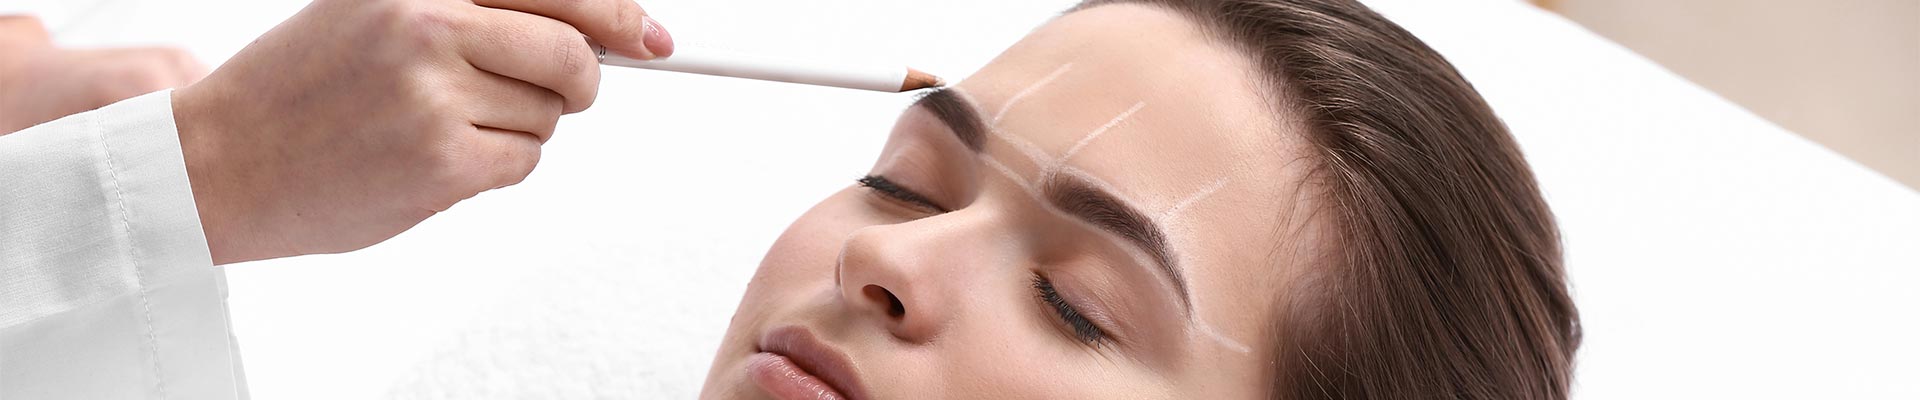 Daxxify Injectable Treatment Banner Image